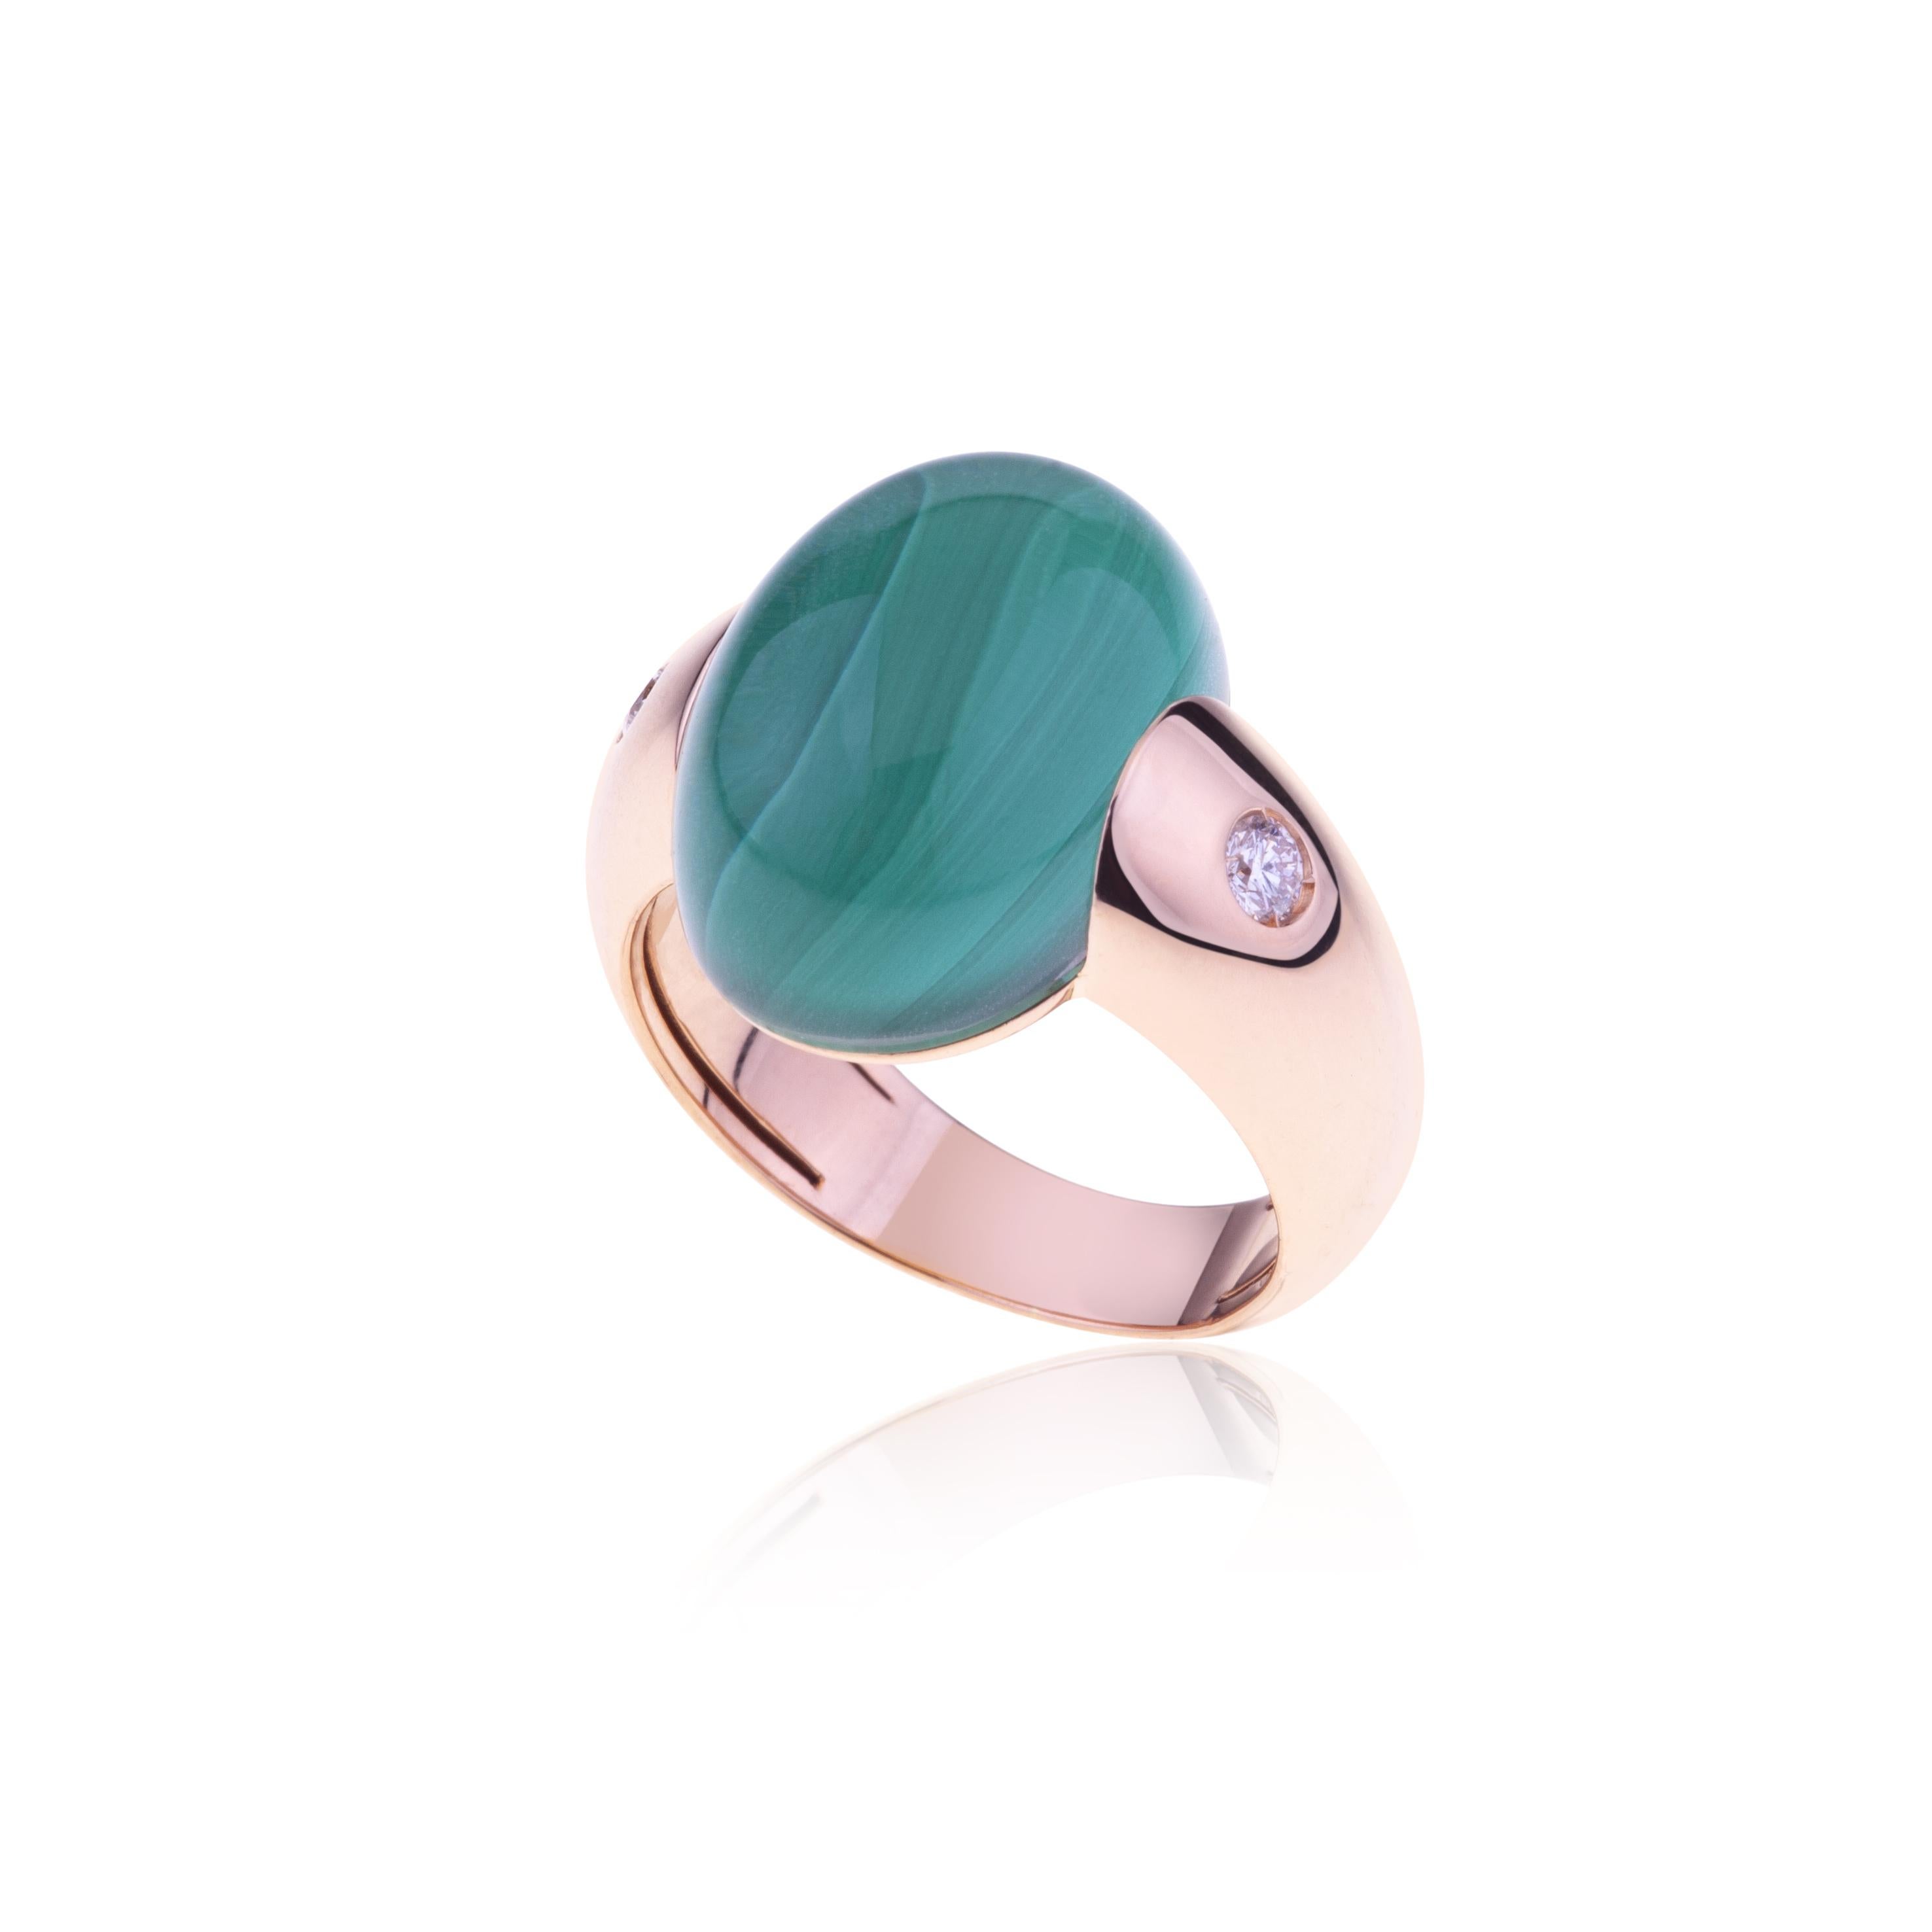 Embrace Collection by Angeletti. Rose  Gold Ring With Malachite and Diamonds.
Iconic Embrace Model, Designed and Manifactured in Rome.
Malachite topped with christal rock is the brilliant green in the center. On the side of the ring, two diamonds 